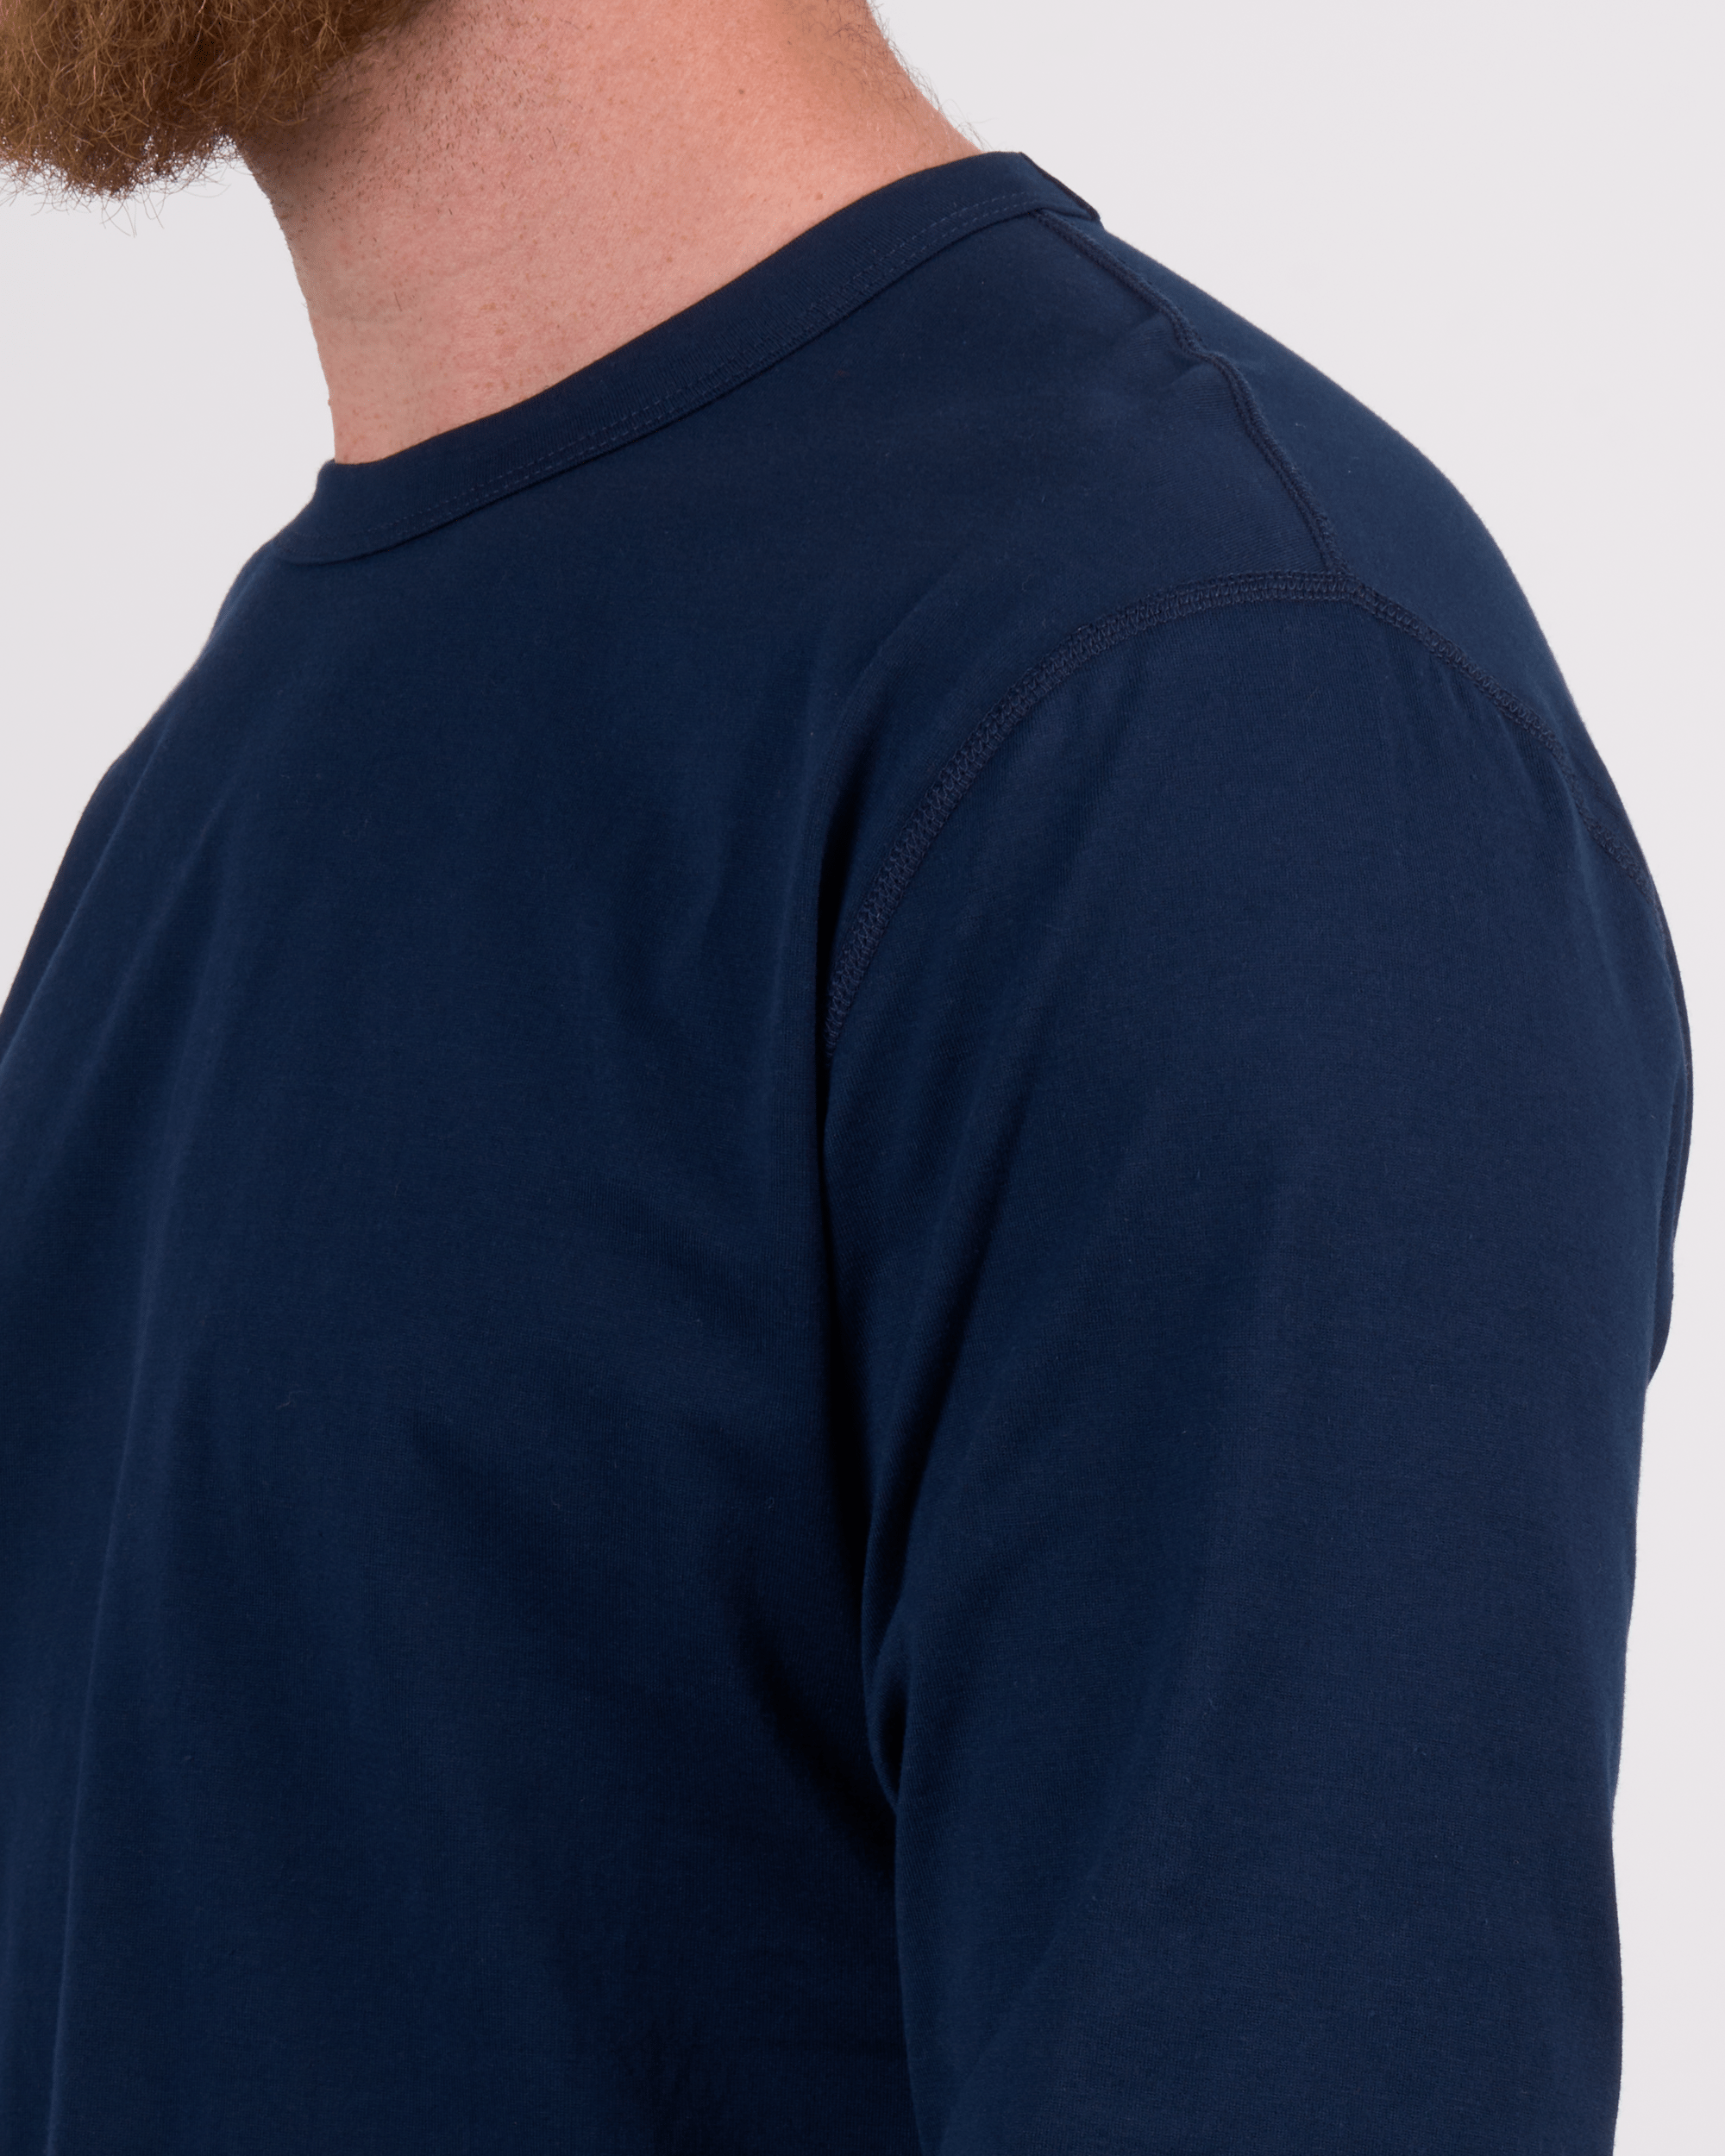 Foreign Rider Co Supima Cotton Navy Long Sleeve T-Shirt Shoulder Flat-lock Stitch Detail